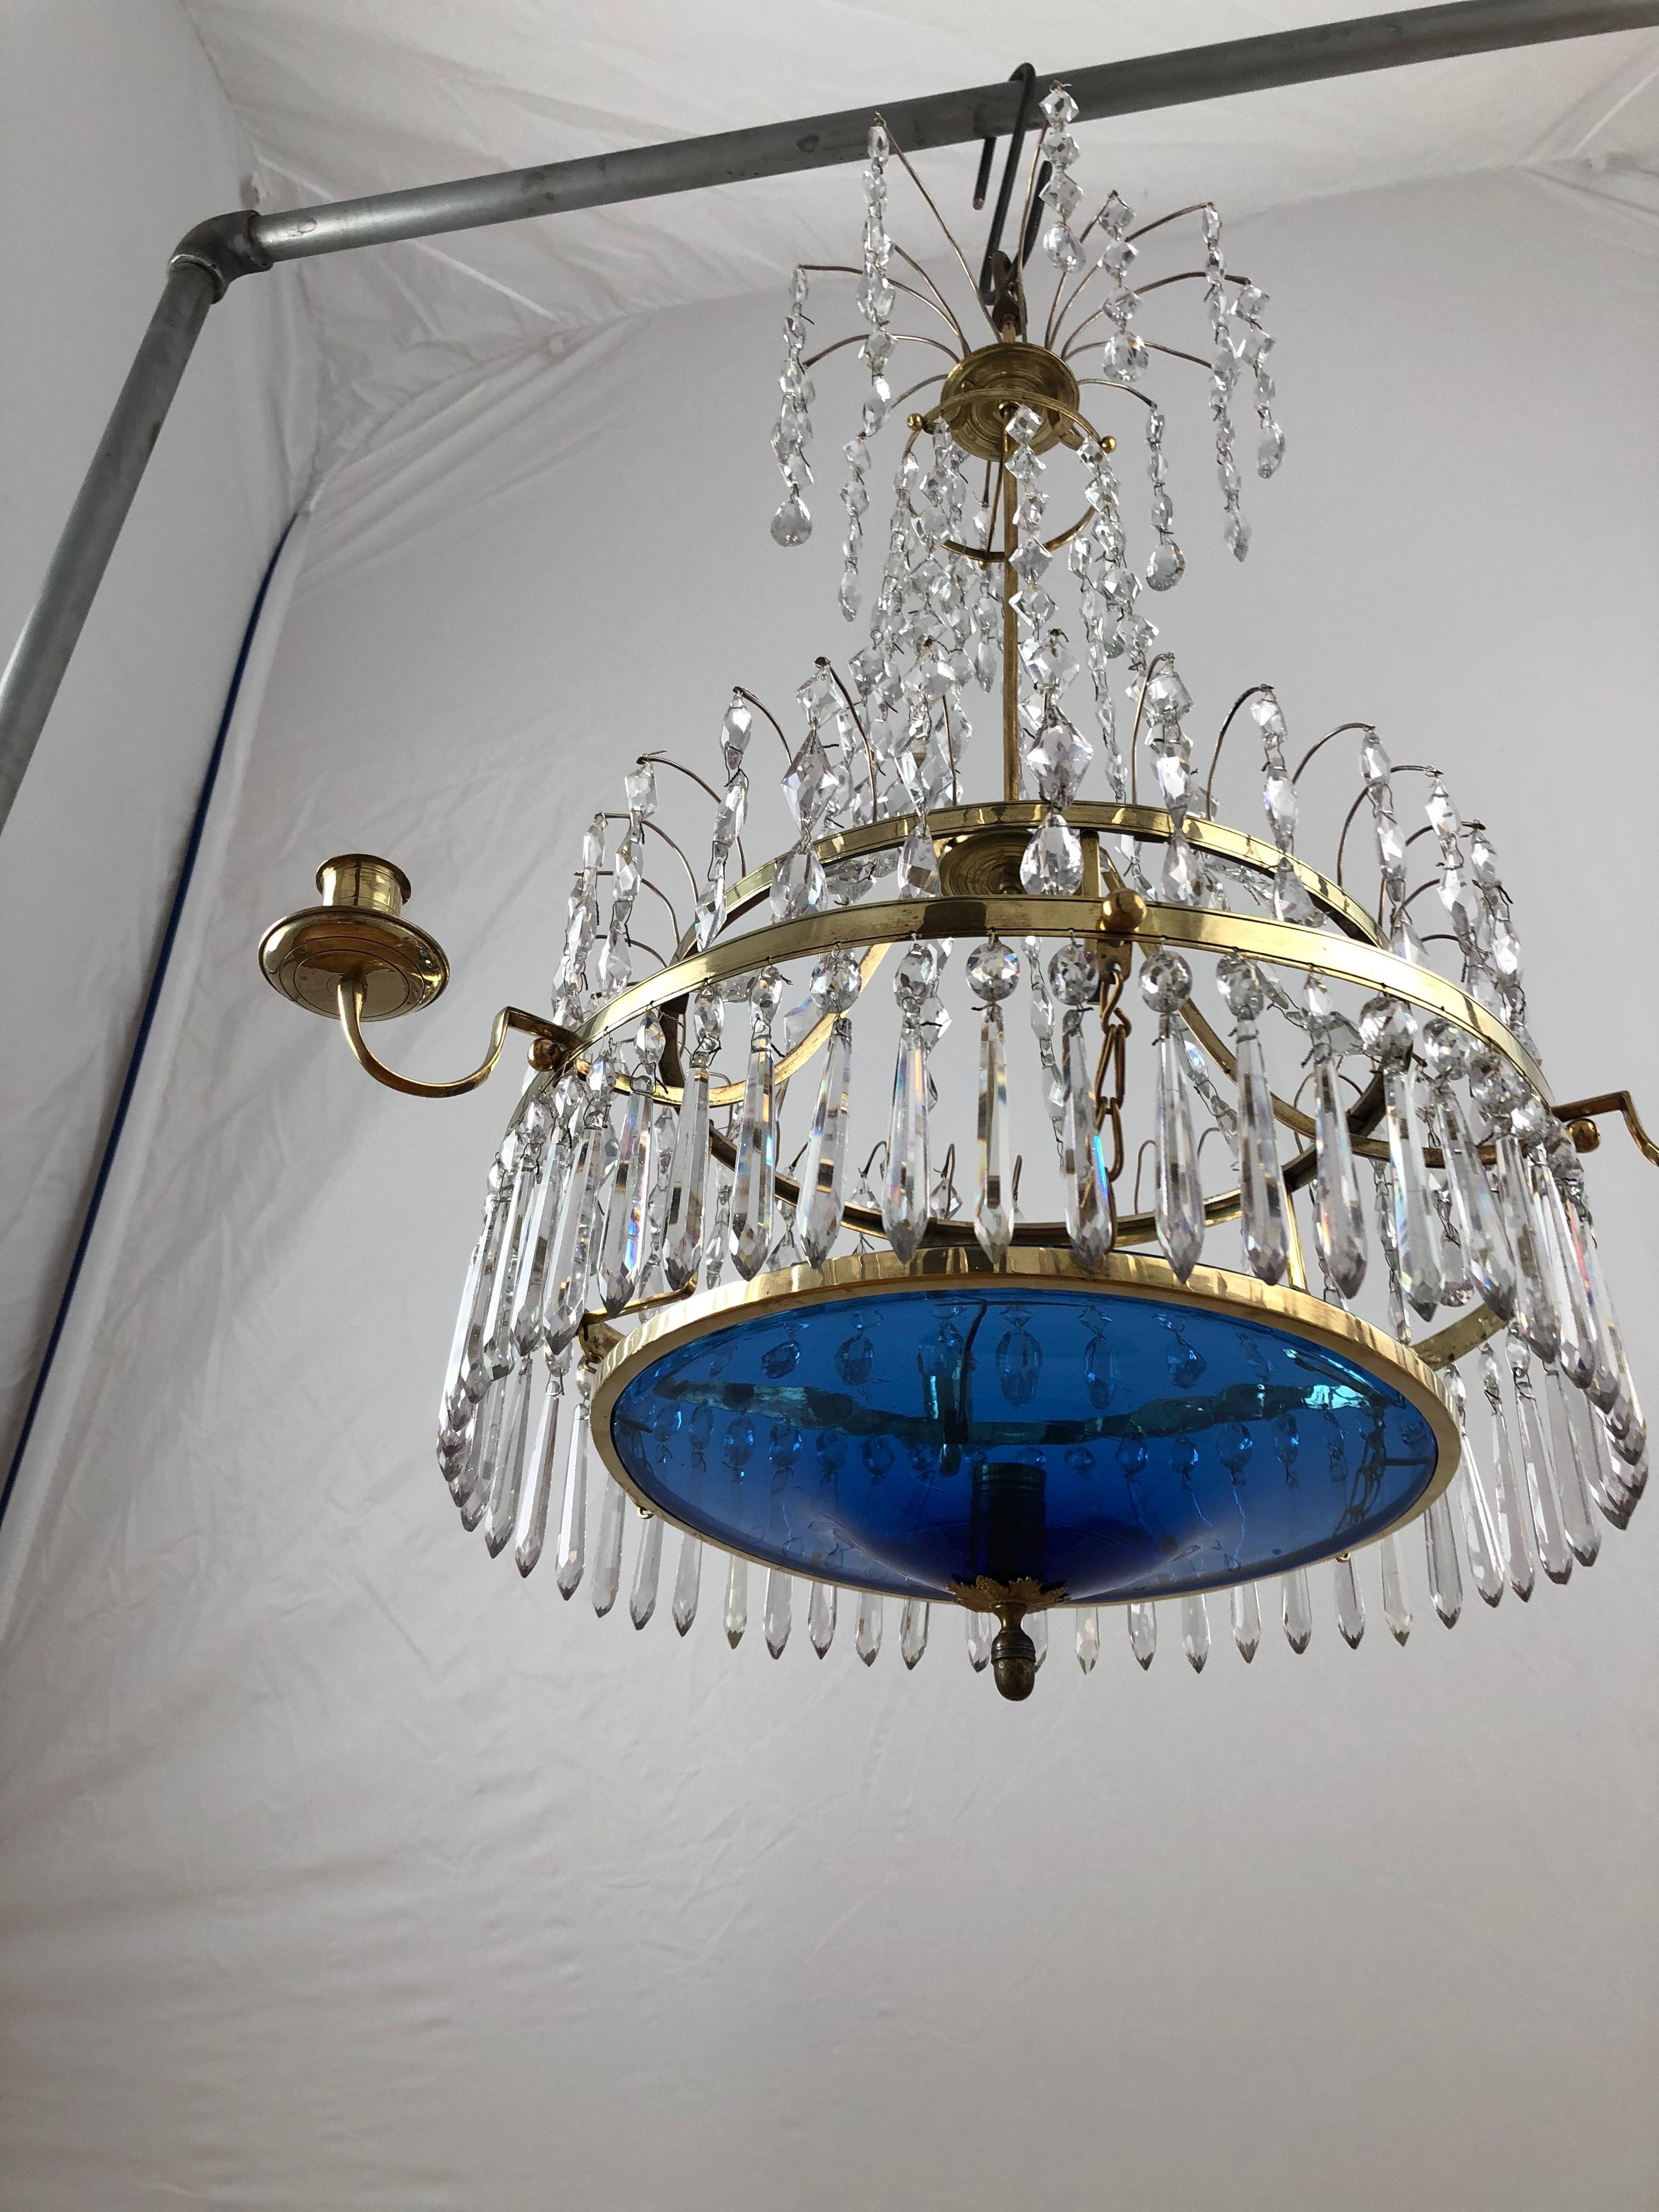 A wonderfully designed small Swedish Gustavian chandelier. With three candleholders on arms from the ring and one centrally placed on the blue glass bowl. The glass bowl is original which is rare. Most often these bowls have been broken and are